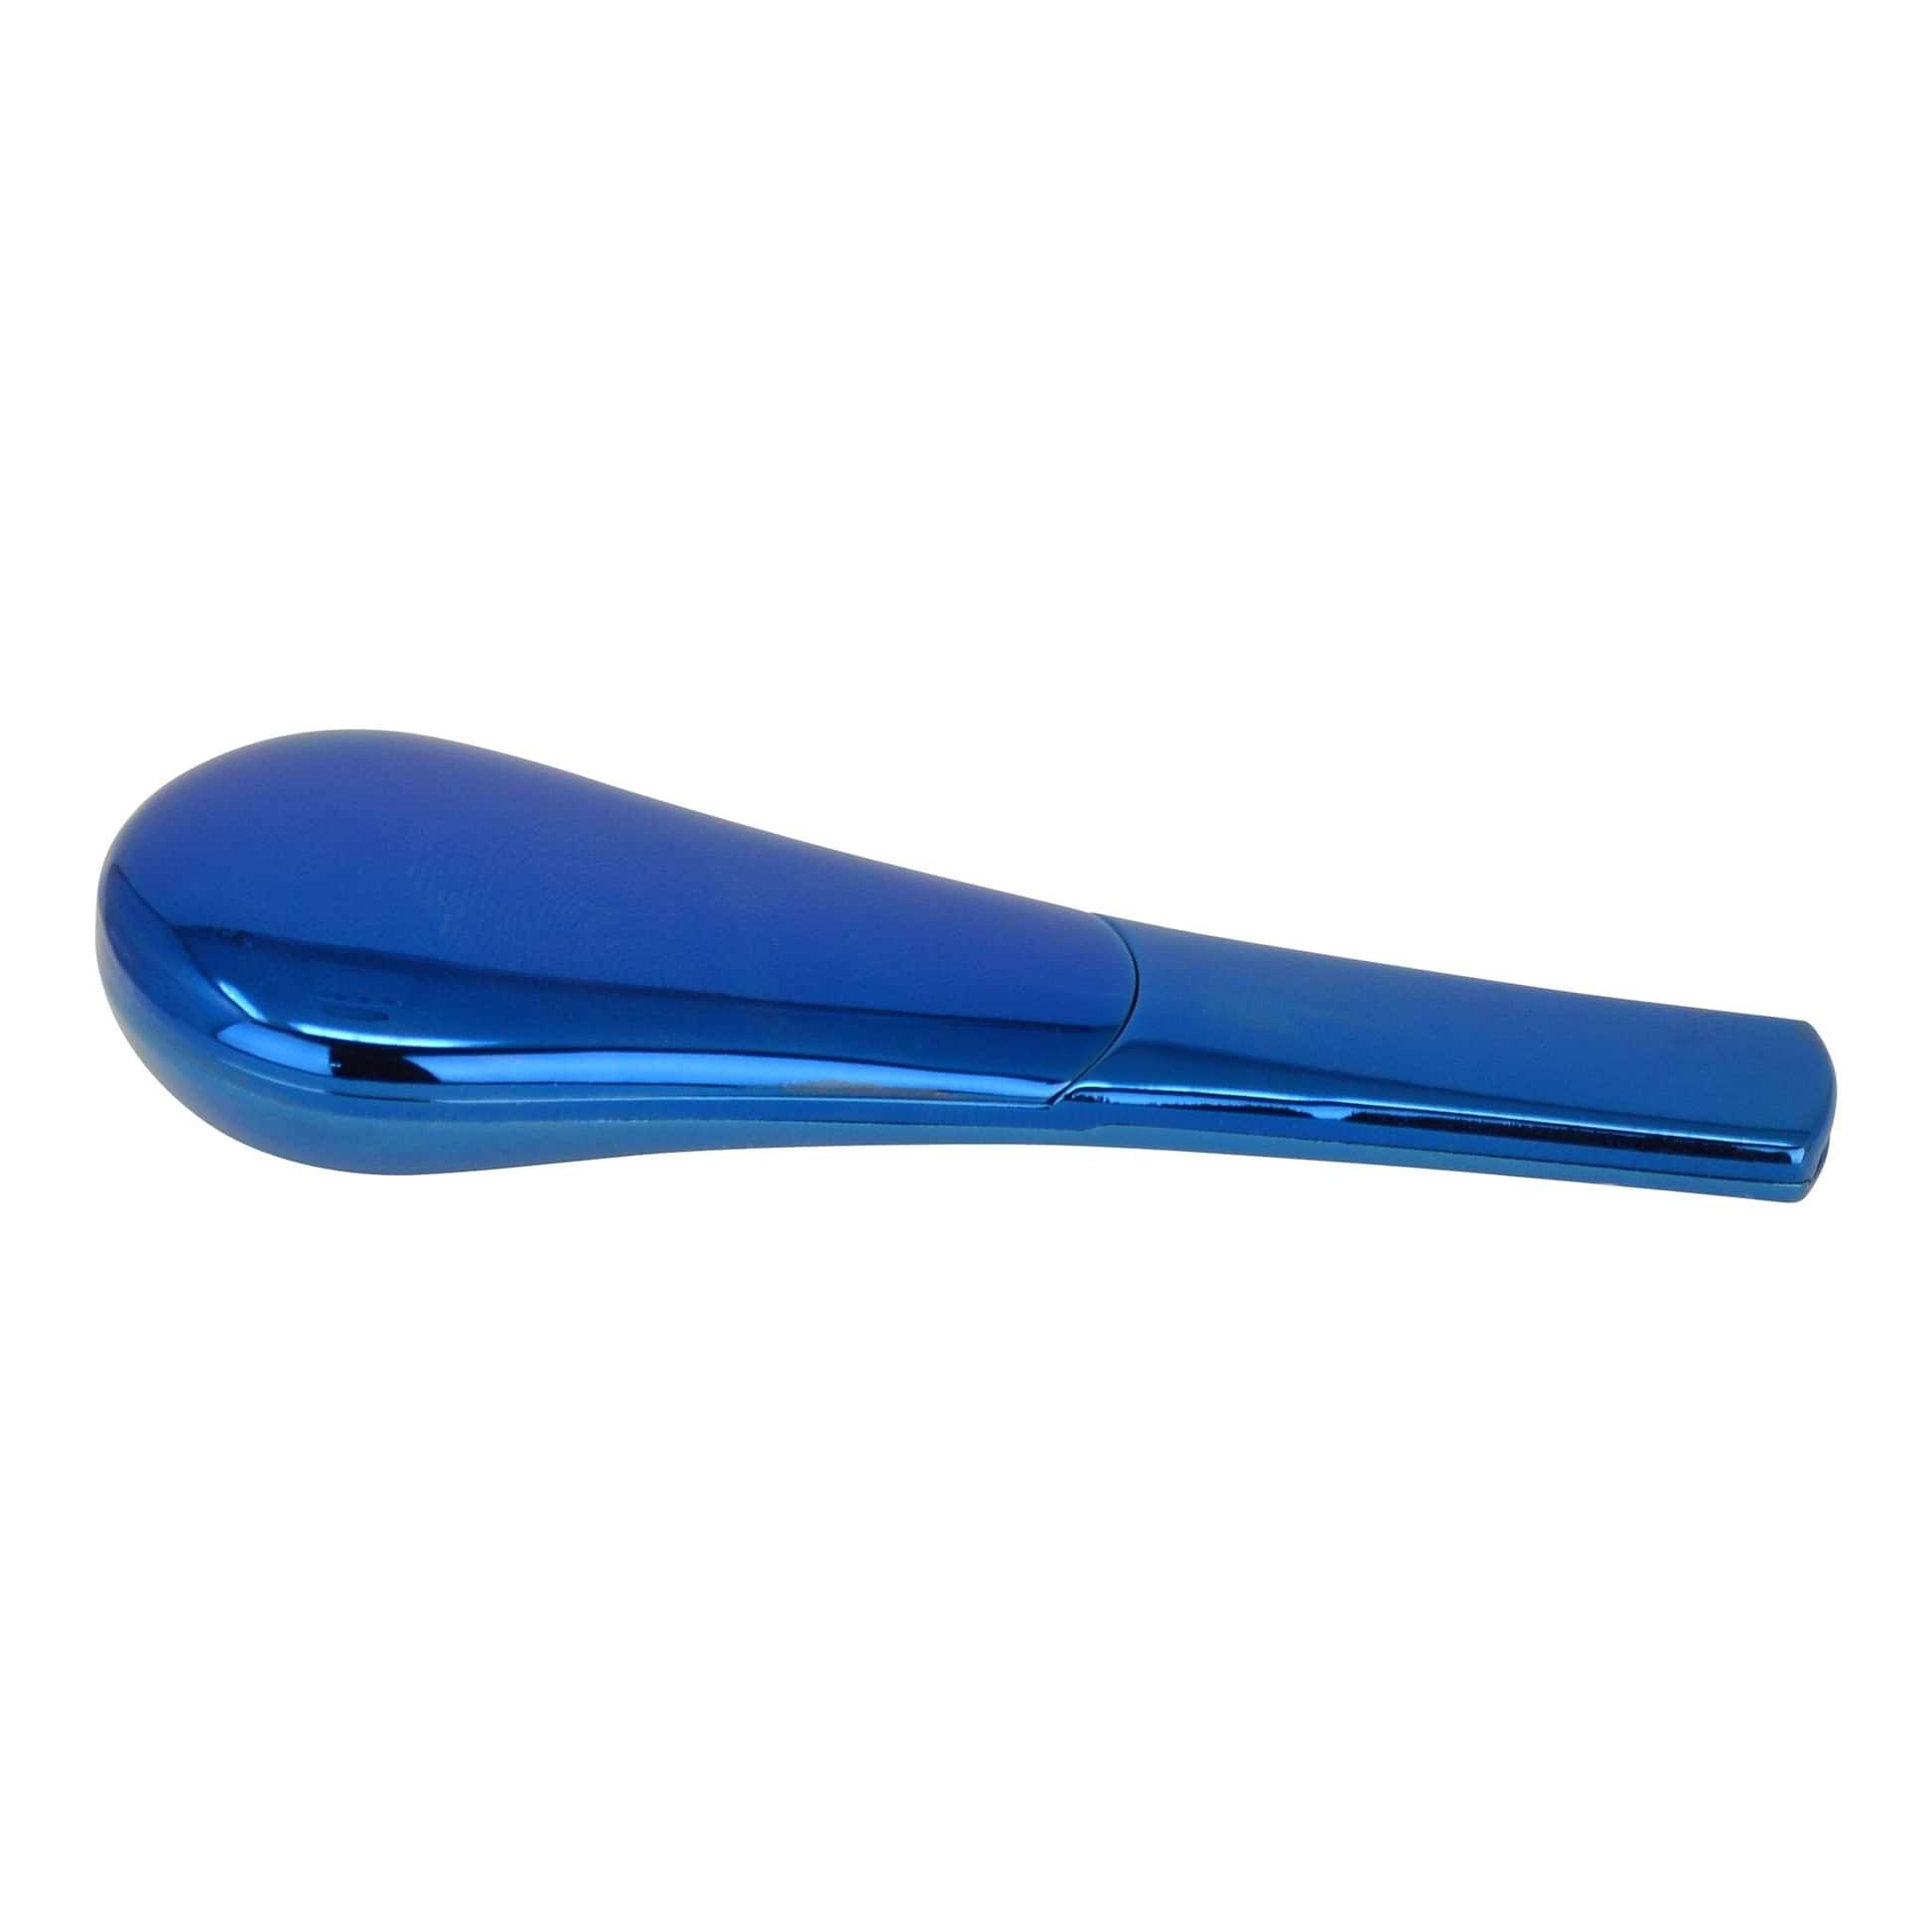 3.5 inch magnetic travel hand pipe in a discreet spoon shape in stylish metallic blue in an elegant case